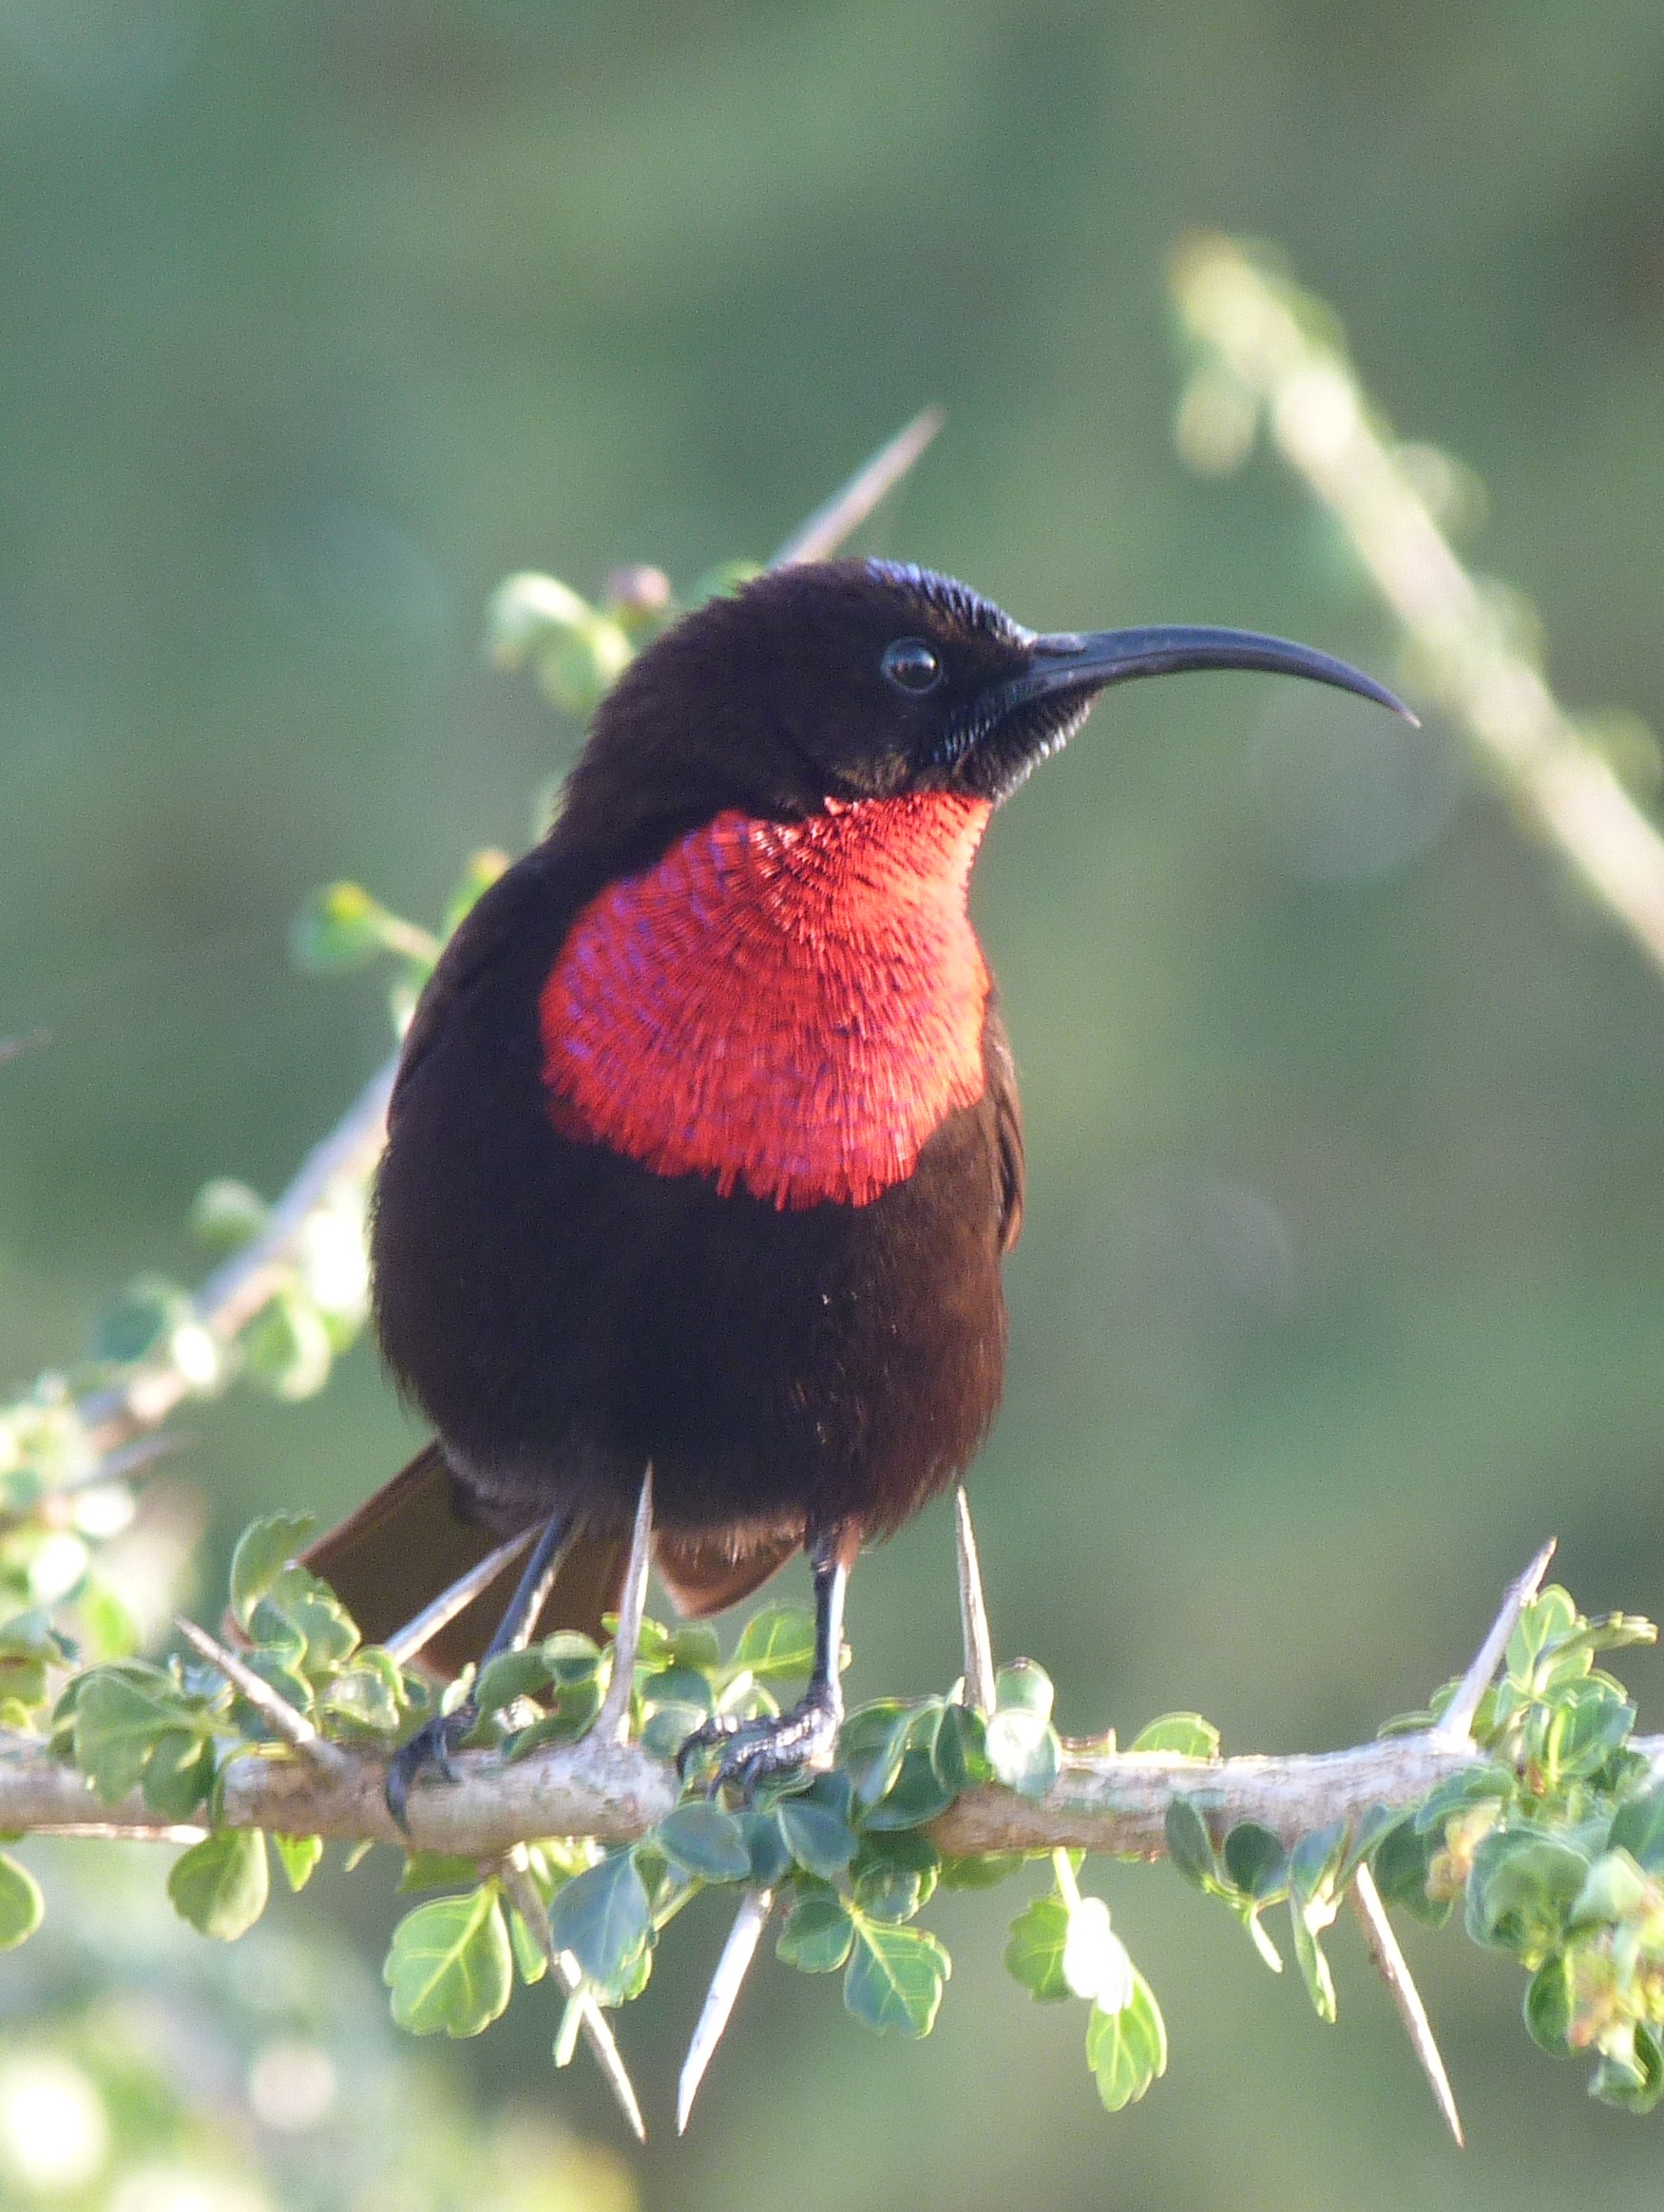 Image: Male Scarlet-chested Sunbirds (Chalcomitra senegalensis) are typical birds of the dry bush, feeding on nectar